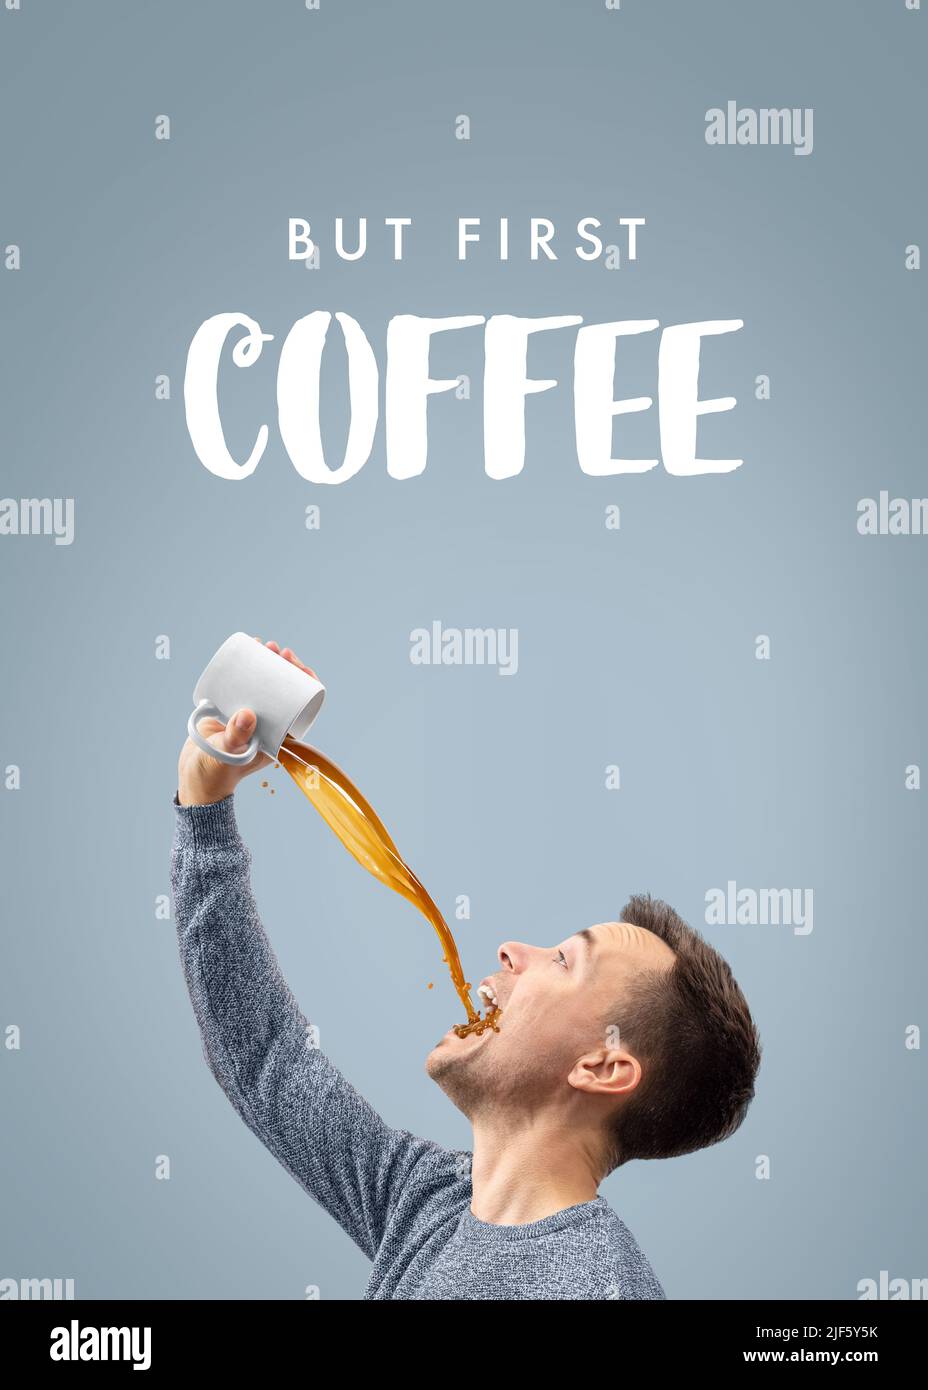 But first coffee - man drinking a lot of coffee Stock Photo